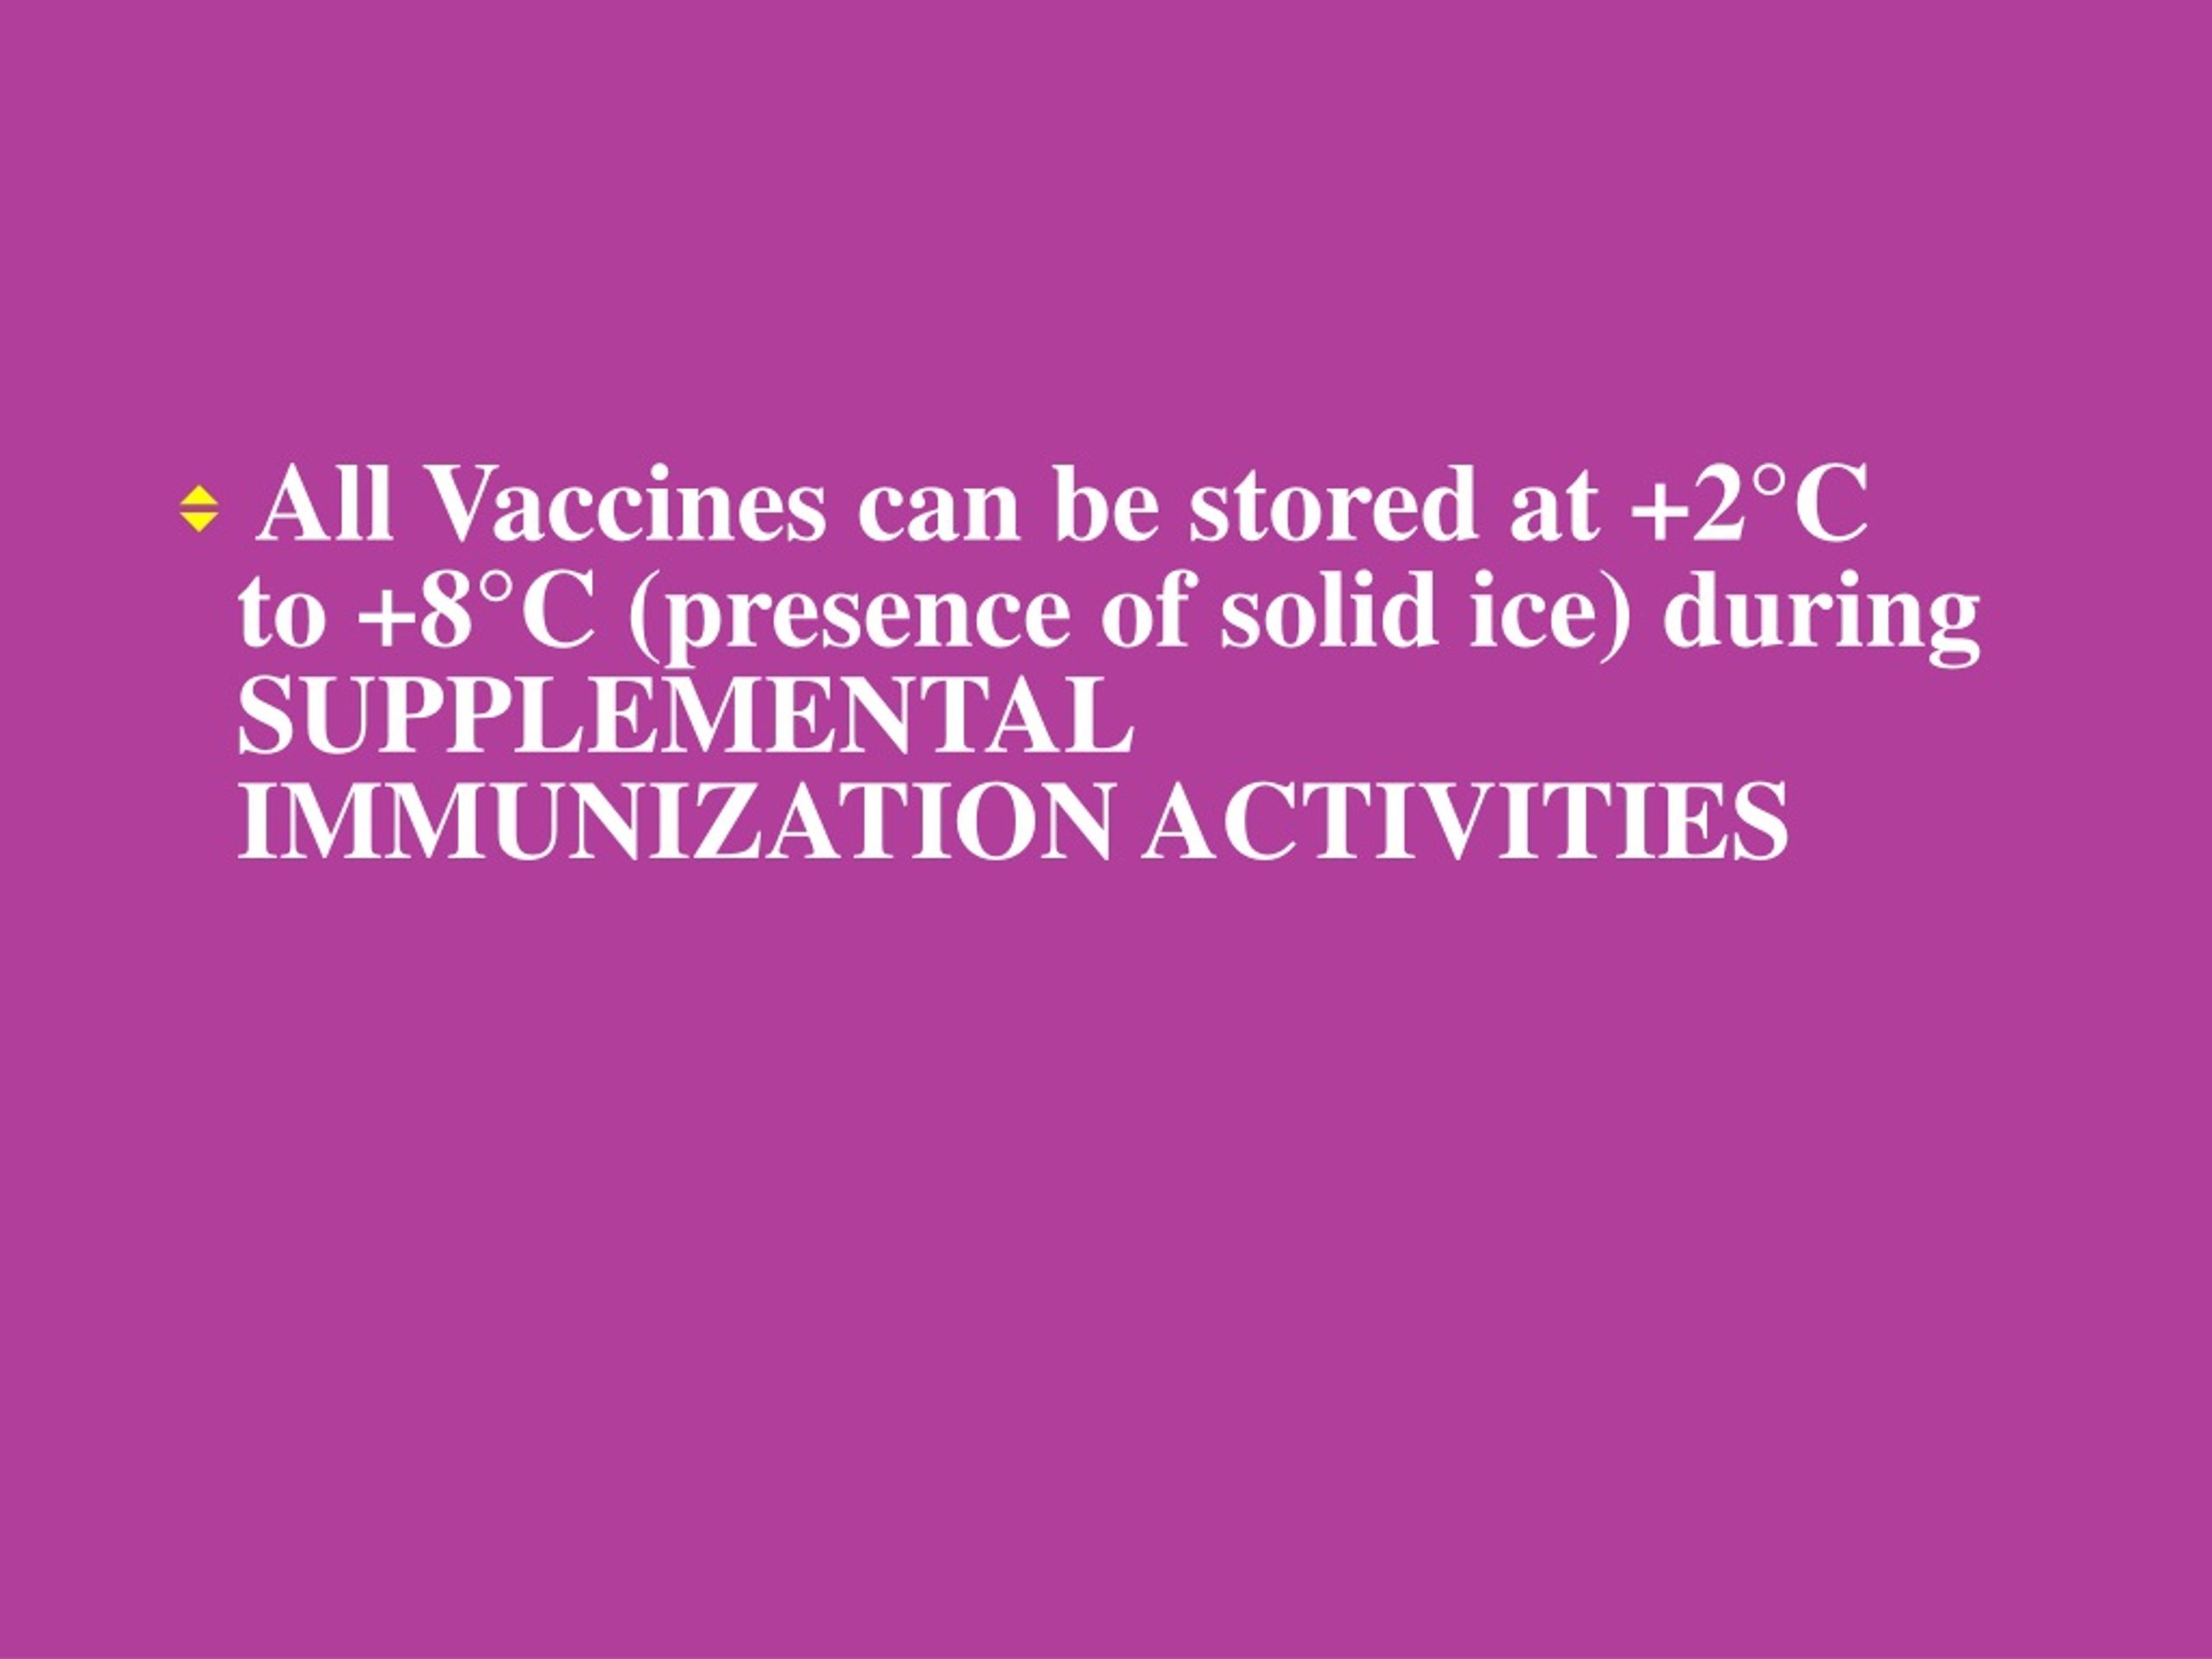 PPT - EPI VACCINES PowerPoint Presentation, free download ...